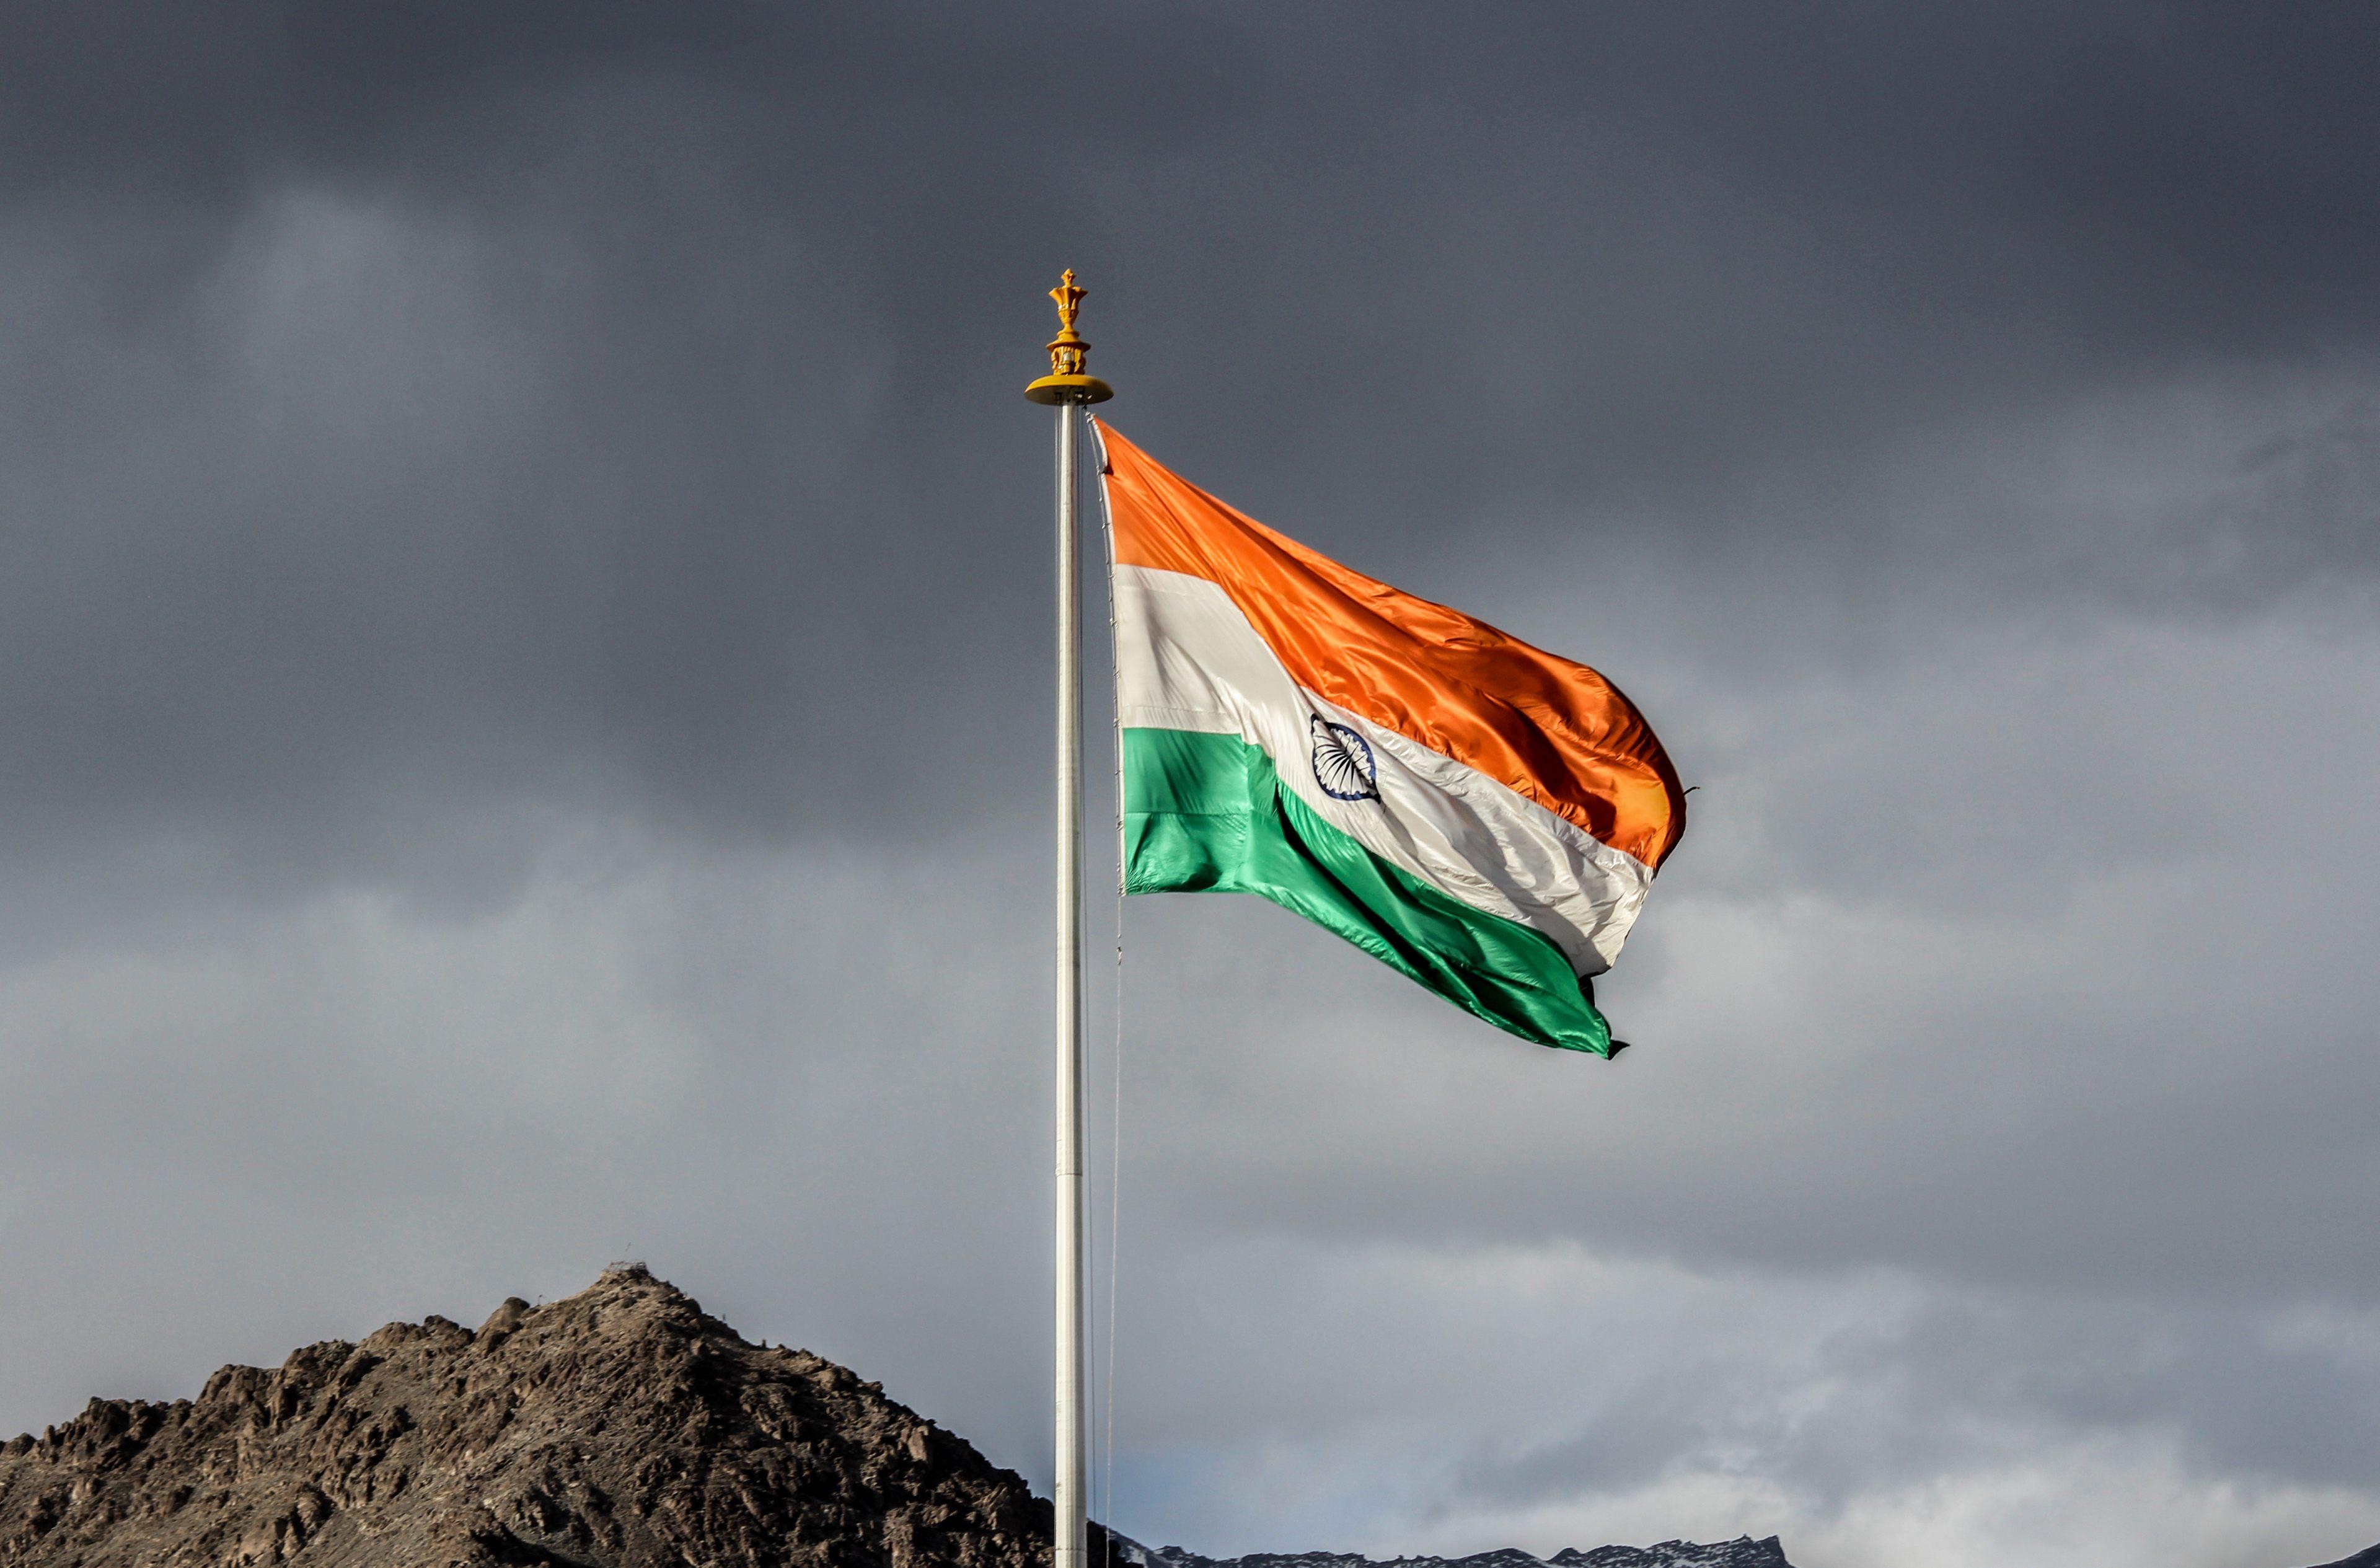 Indian Flag 4k Wallpapers - Top Free Indian Flag 4k Backgrounds